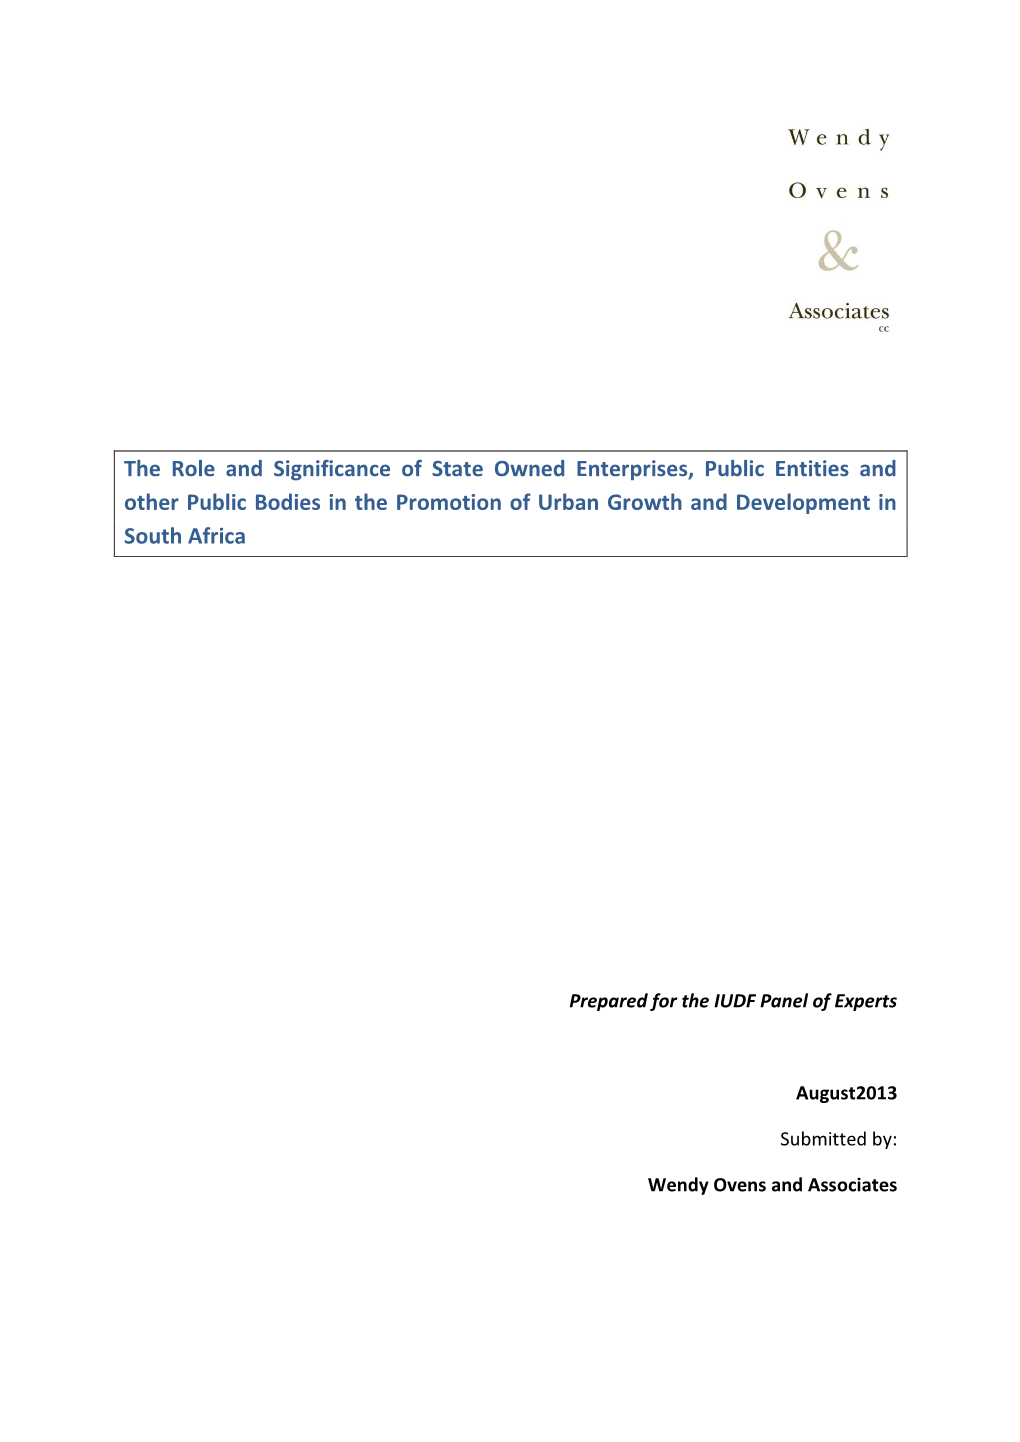 The Role and Significance of State Owned Enterprises, Public Entities and Other Public Bodies in the Promotion of Urban Growth and Development in South Africa